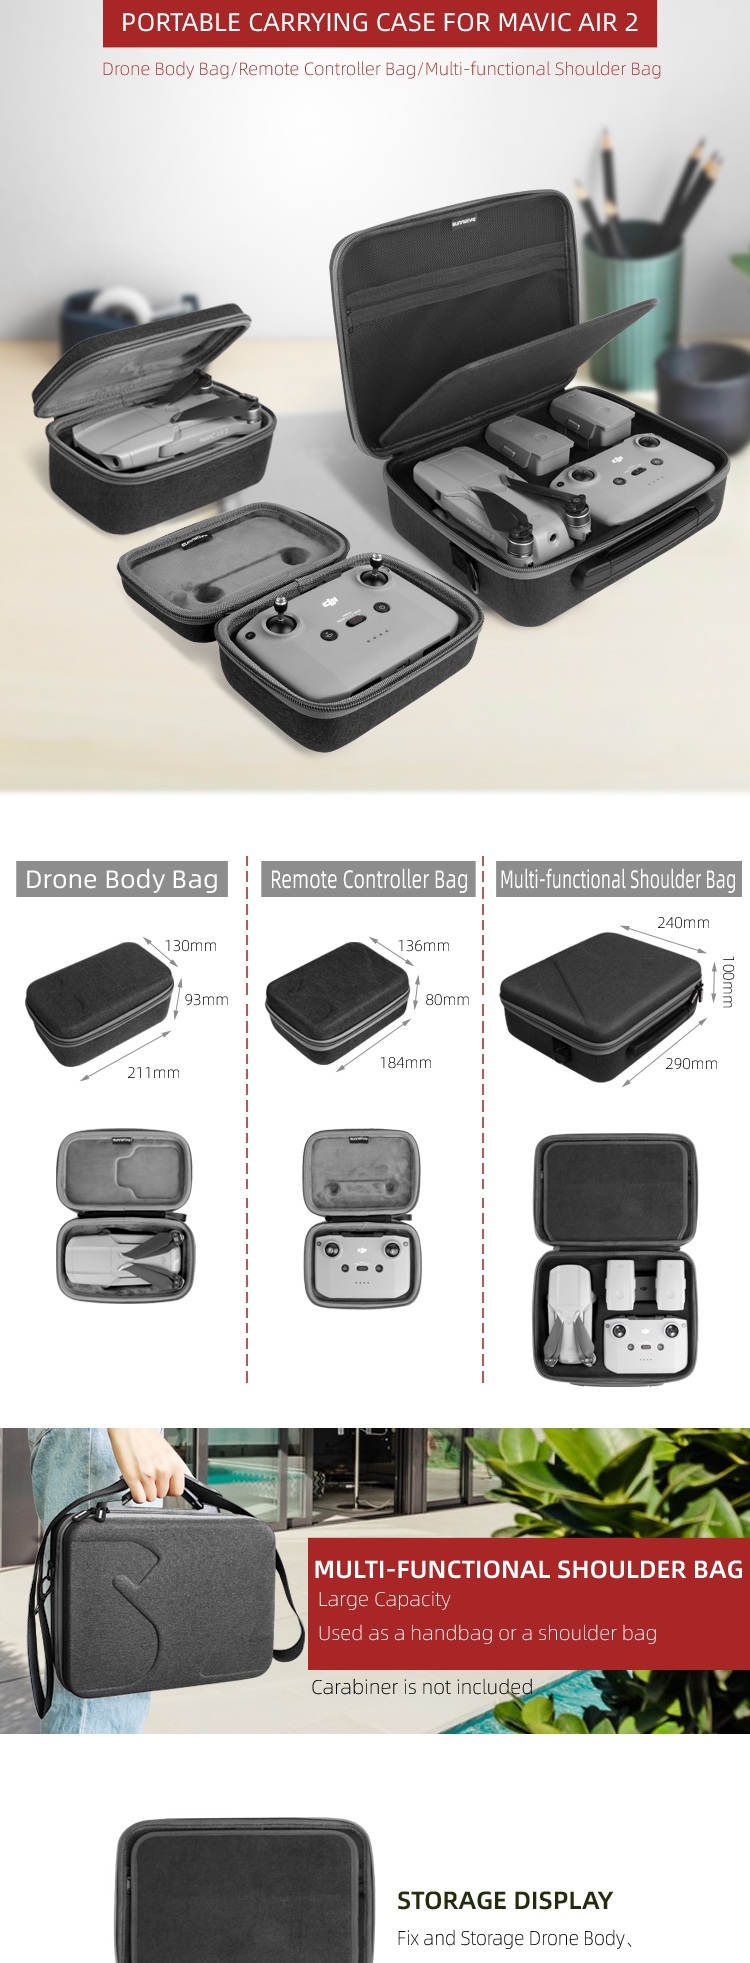 Sunnylife Portable Waterproof Storage Shoulder Bag Carrying Case Box Suitcase for DJI Mavic Air 2 RC Drone